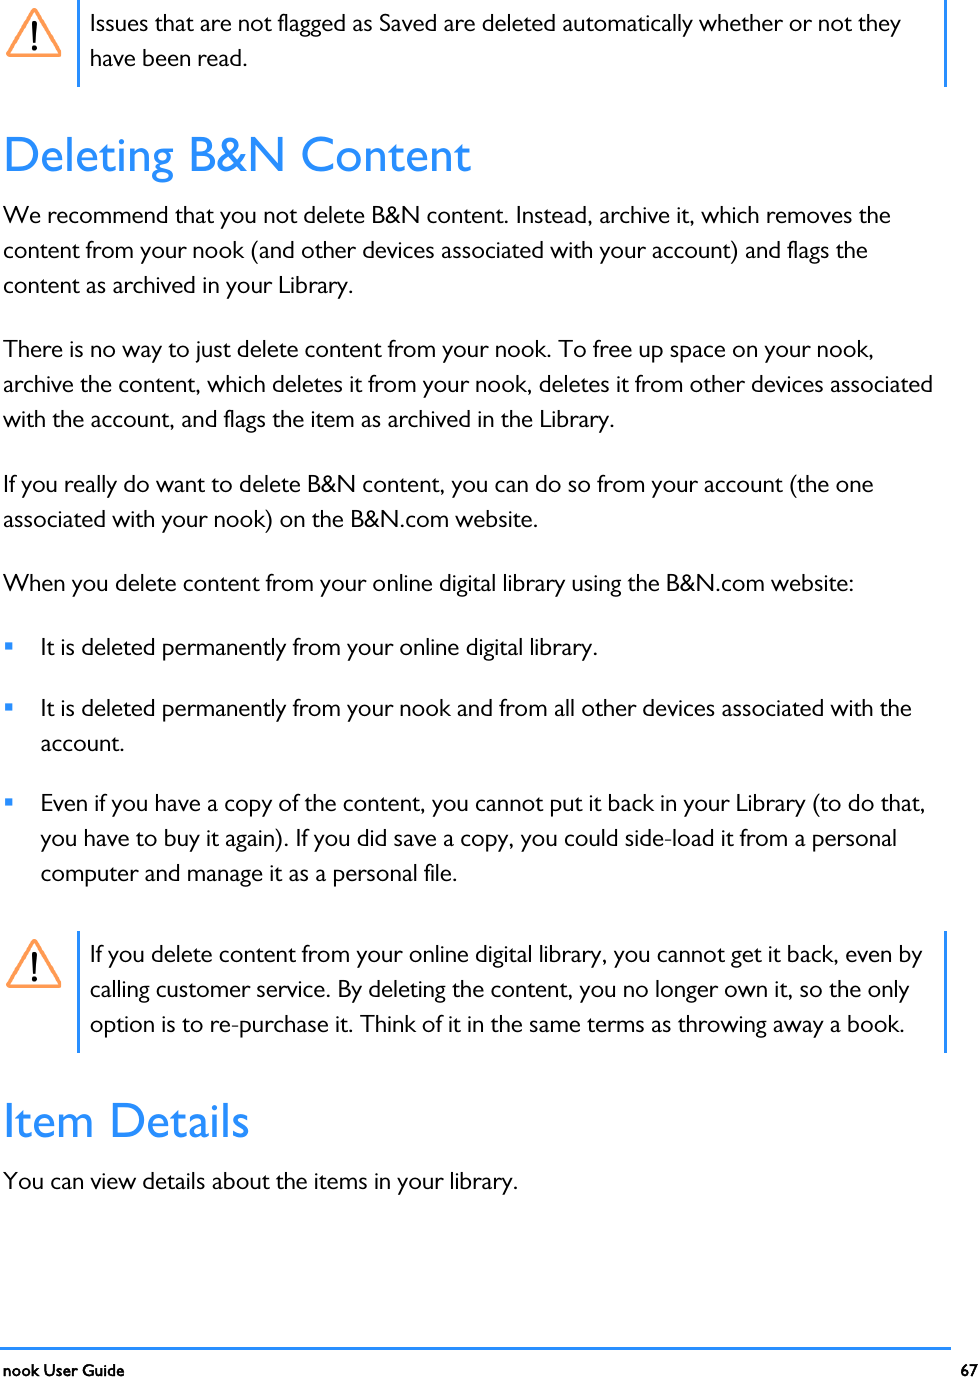  nook User Guide    67         Issues that are not flagged as Saved are deleted automatically whether or not they have been read. Deleting B&amp;N Content We recommend that you not delete B&amp;N content. Instead, archive it, which removes the content from your nook (and other devices associated with your account) and flags the content as archived in your Library. There is no way to just delete content from your nook. To free up space on your nook, archive the content, which deletes it from your nook, deletes it from other devices associated with the account, and flags the item as archived in the Library. If you really do want to delete B&amp;N content, you can do so from your account (the one associated with your nook) on the B&amp;N.com website. When you delete content from your online digital library using the B&amp;N.com website:  It is deleted permanently from your online digital library.  It is deleted permanently from your nook and from all other devices associated with the account.  Even if you have a copy of the content, you cannot put it back in your Library (to do that, you have to buy it again). If you did save a copy, you could side-load it from a personal computer and manage it as a personal file.  If you delete content from your online digital library, you cannot get it back, even by calling customer service. By deleting the content, you no longer own it, so the only option is to re-purchase it. Think of it in the same terms as throwing away a book. Item Details You can view details about the items in your library. 